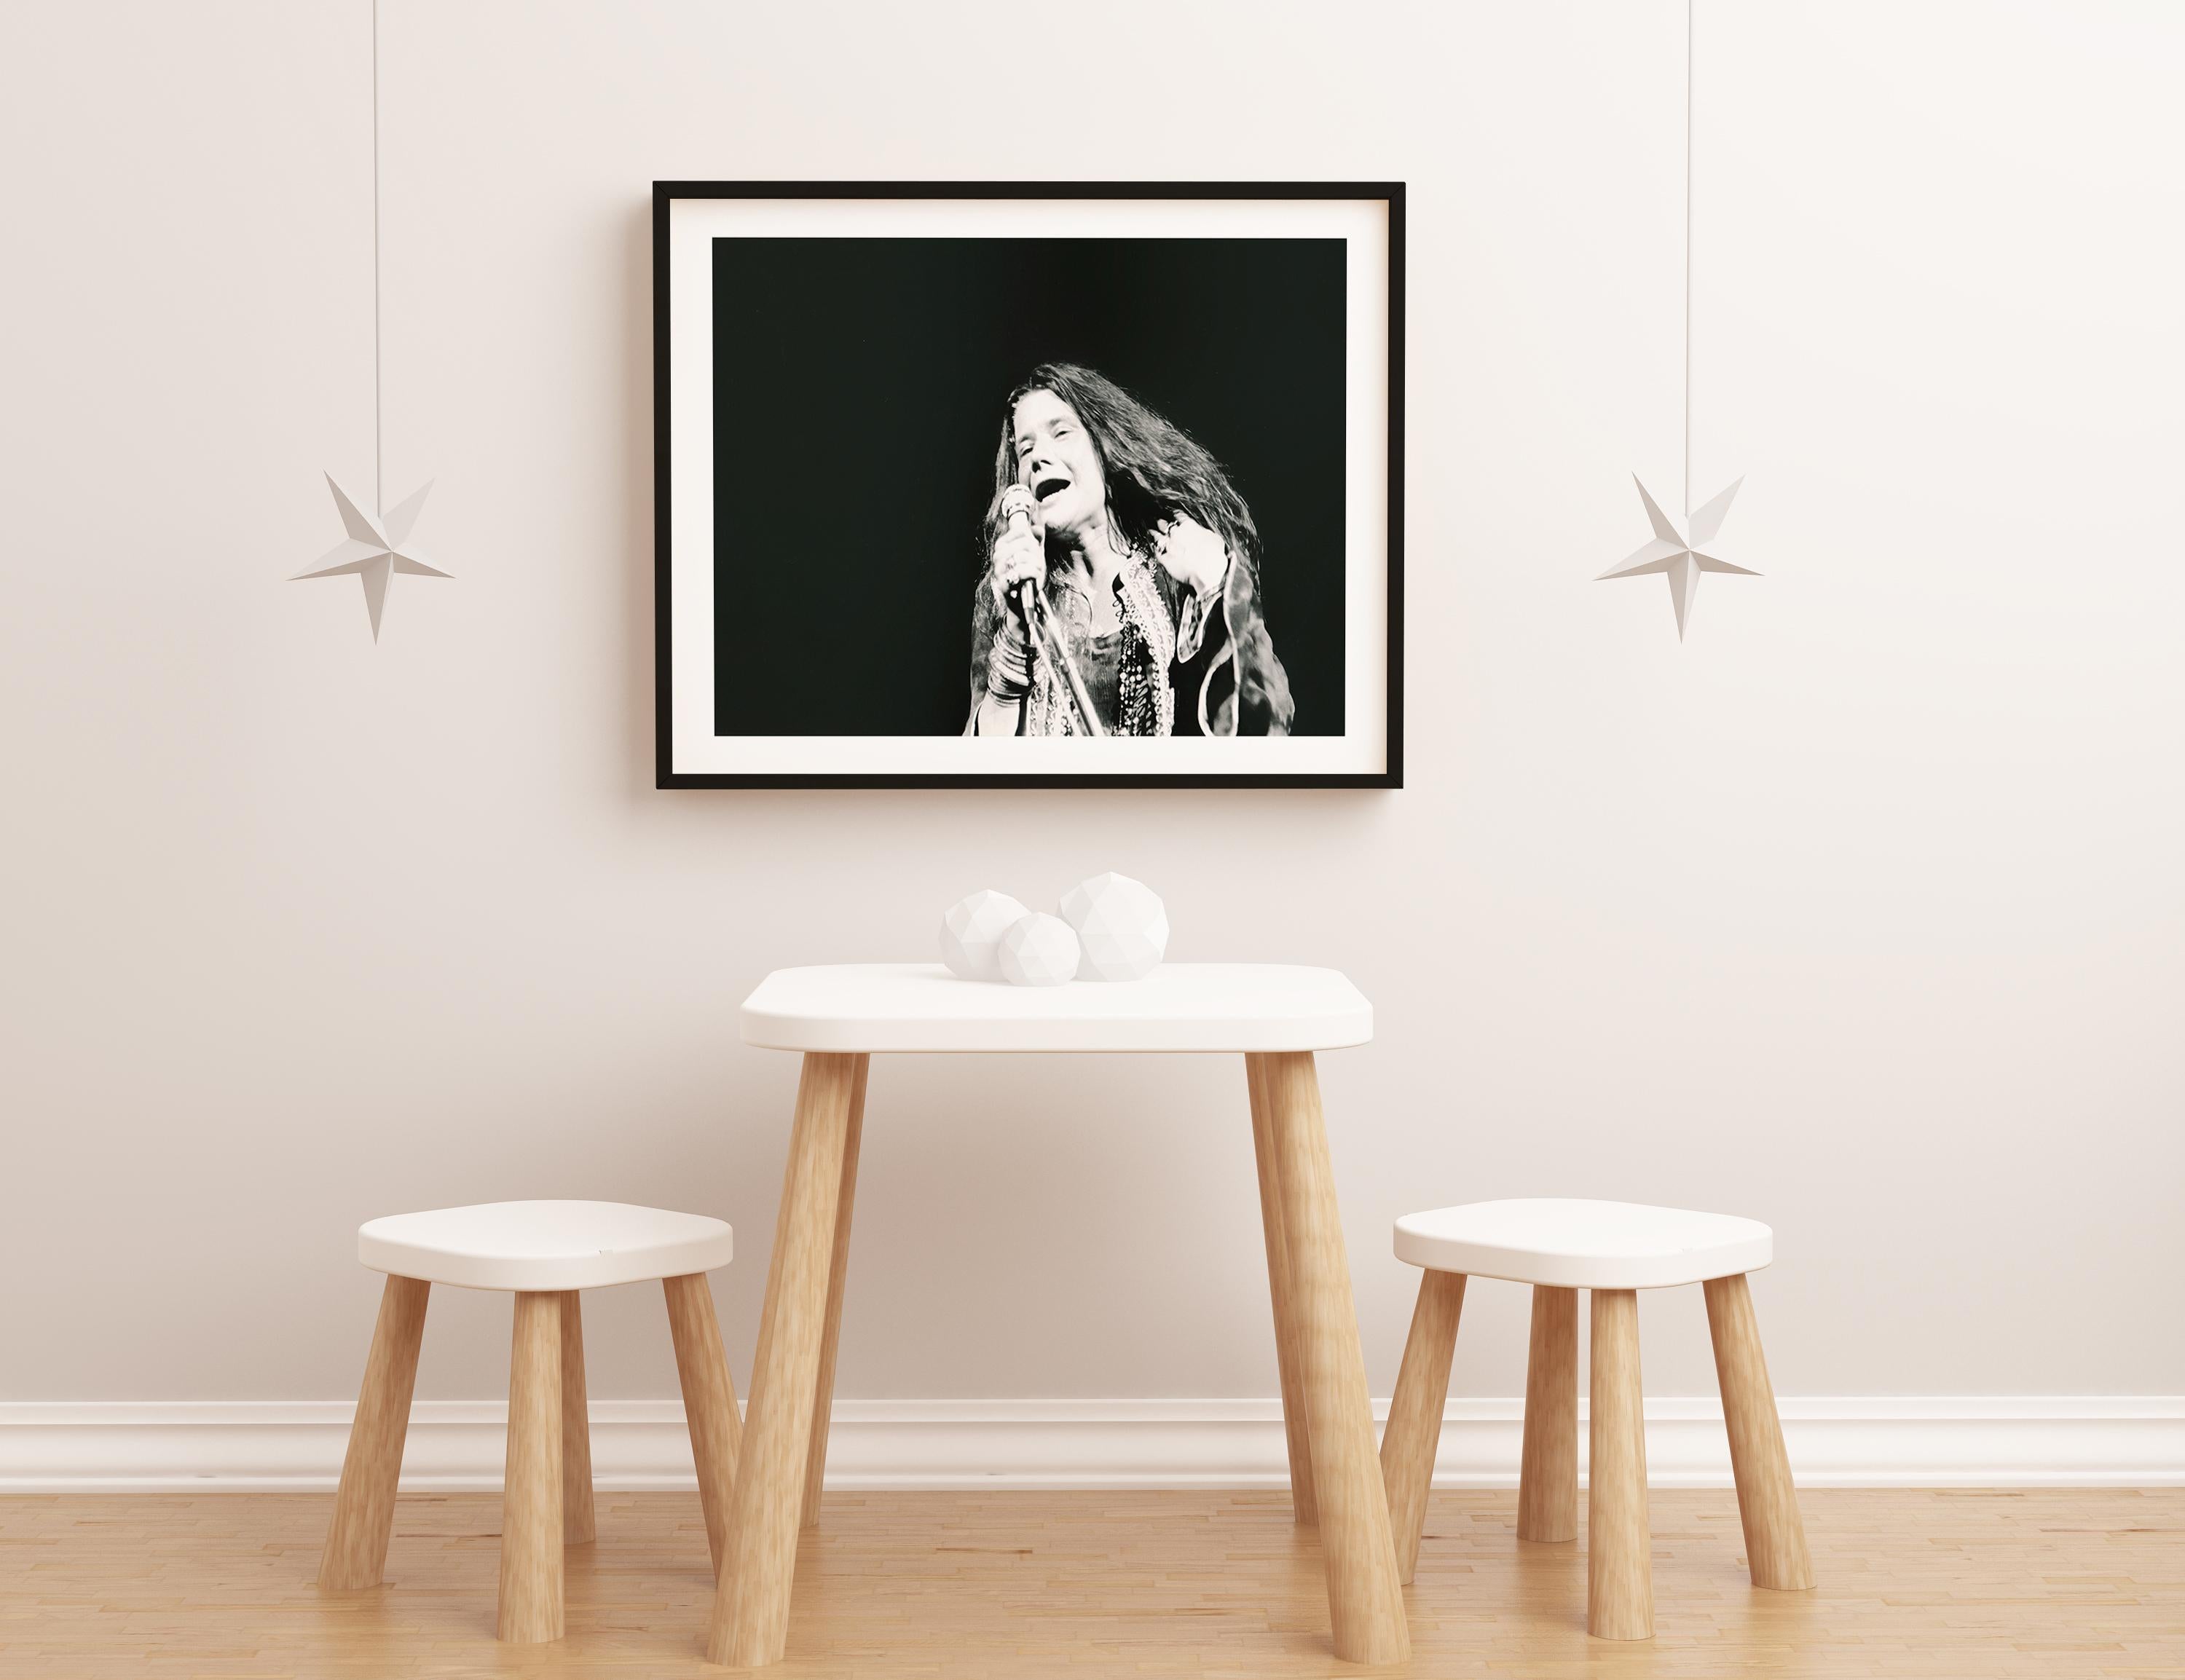 Janis Joplin Singing at Woodstock Globe Photos Fine Art Print - Black Black and White Photograph by Unknown